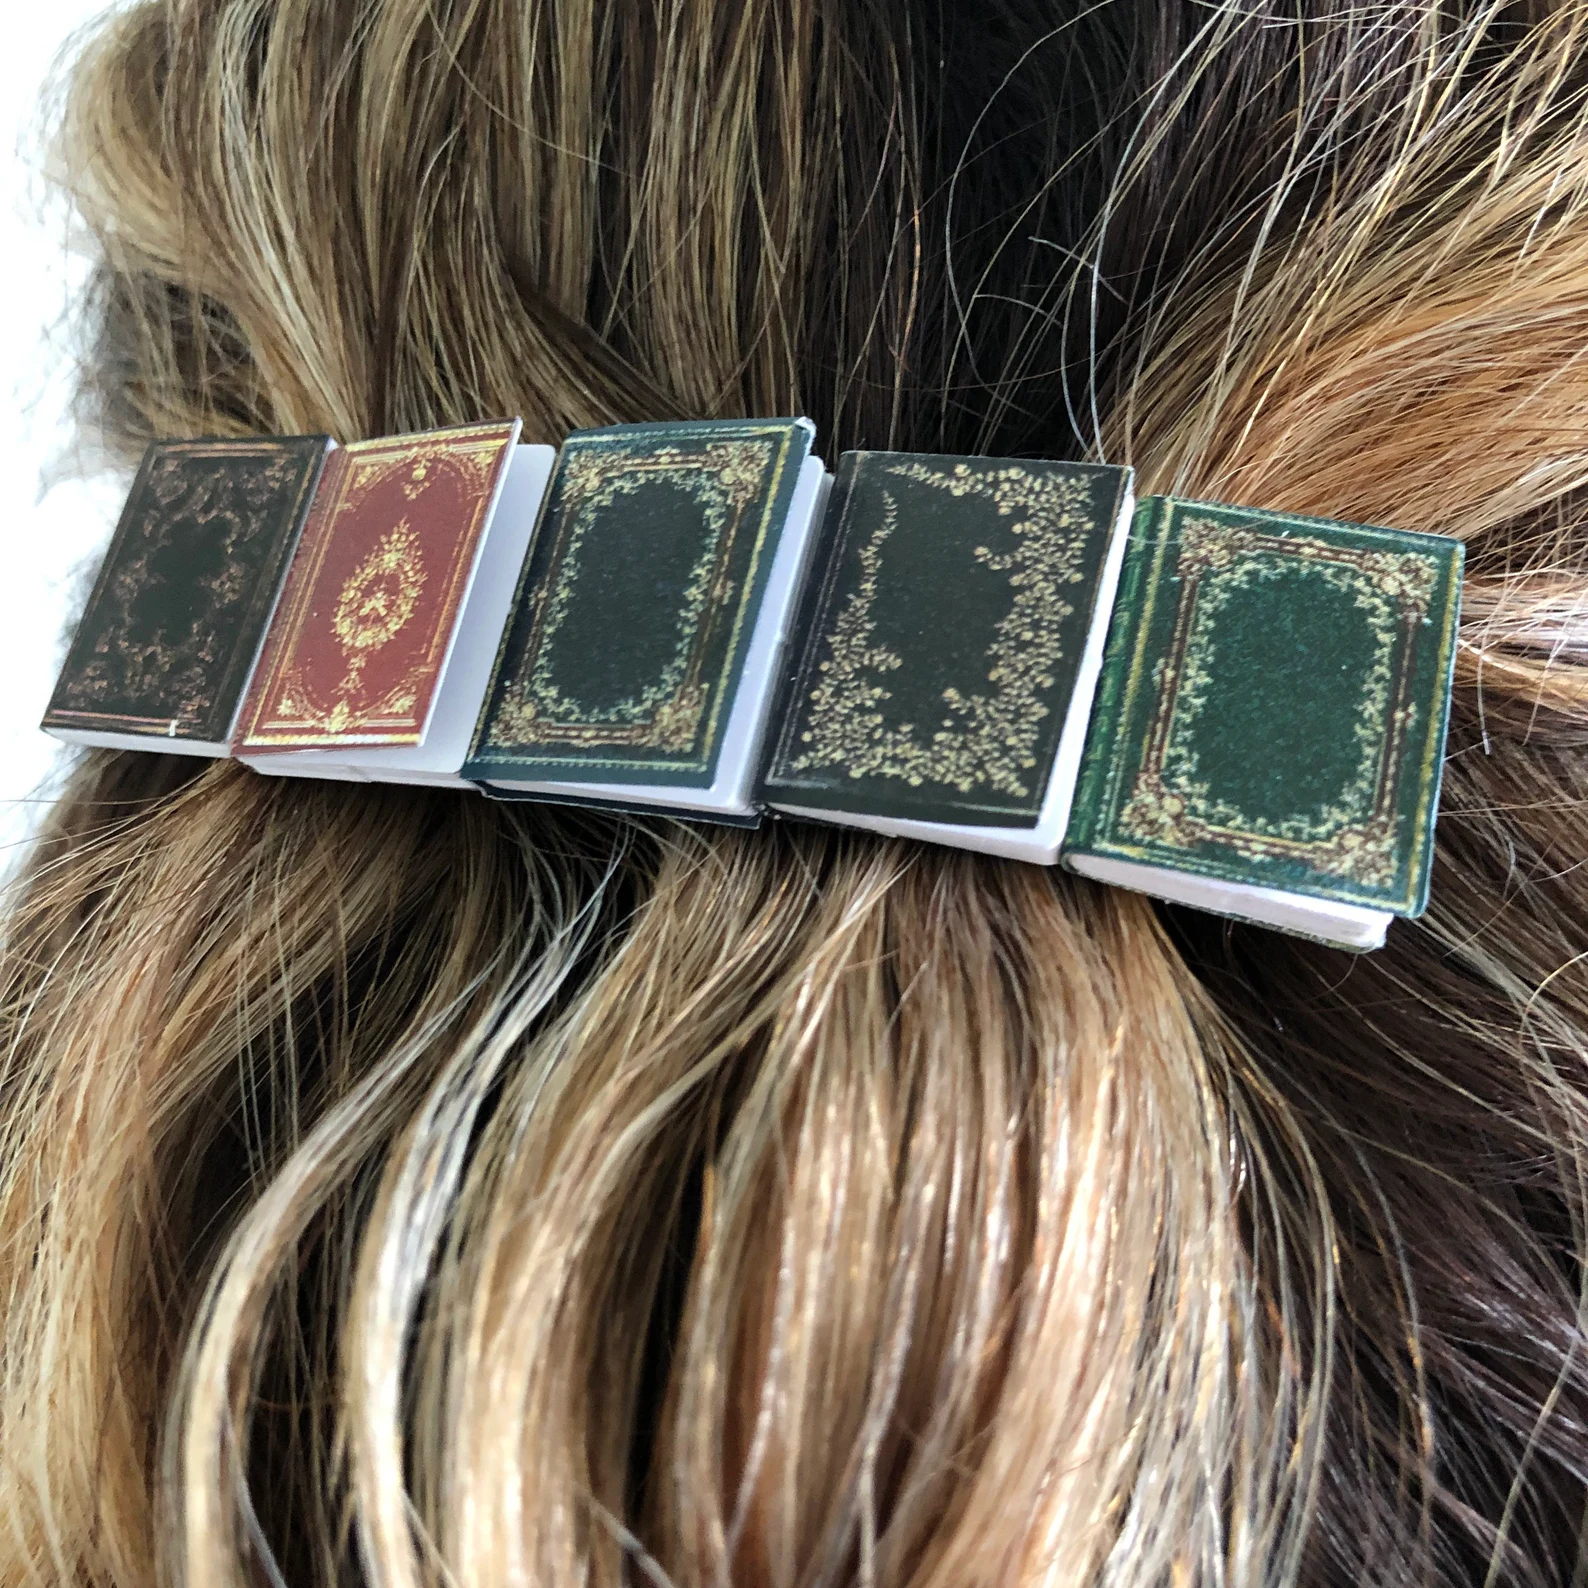 a photo of a five miniature books set on a hair clips, creating such a cute literary hairstyle